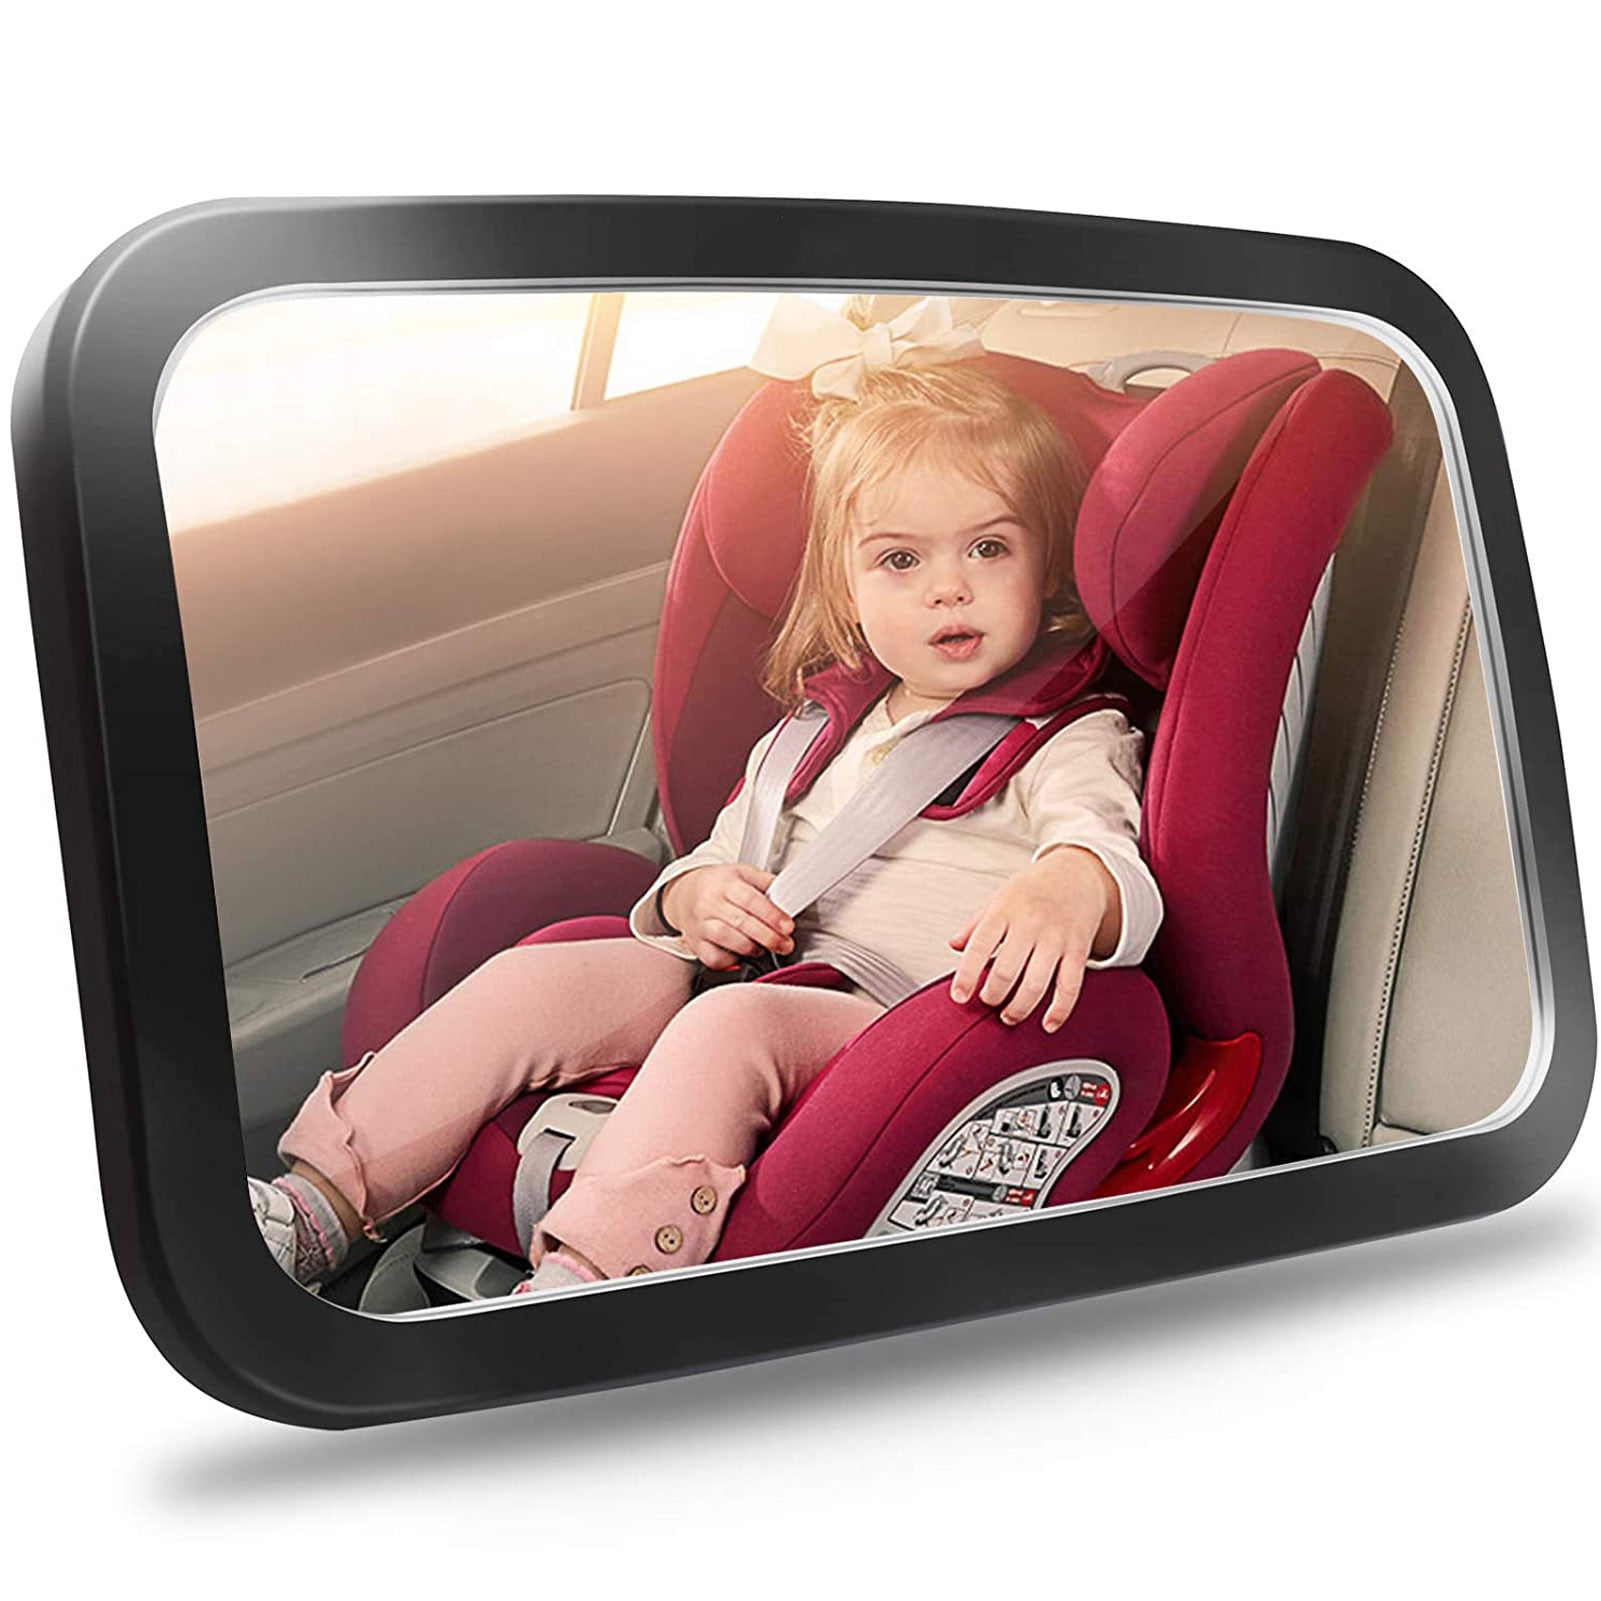 1X Car Truck Easy View Rear Back Seat Baby Child Safety Mirror Suction MirroRKUS 